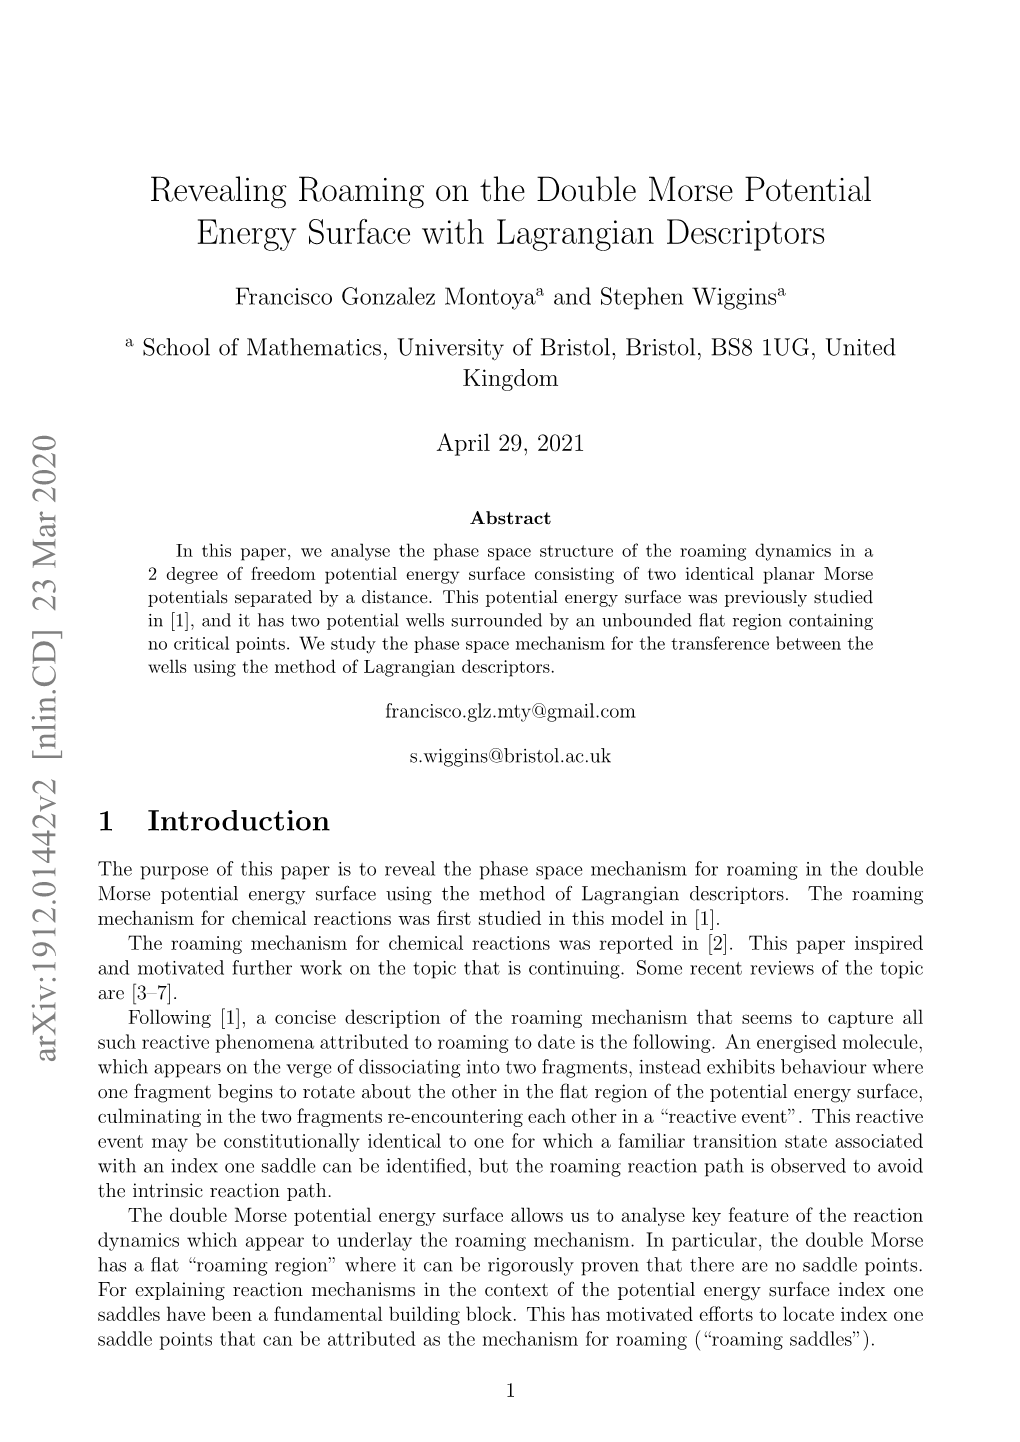 Revealing Roaming on the Double Morse Potential Energy Surface with Lagrangian Descriptors